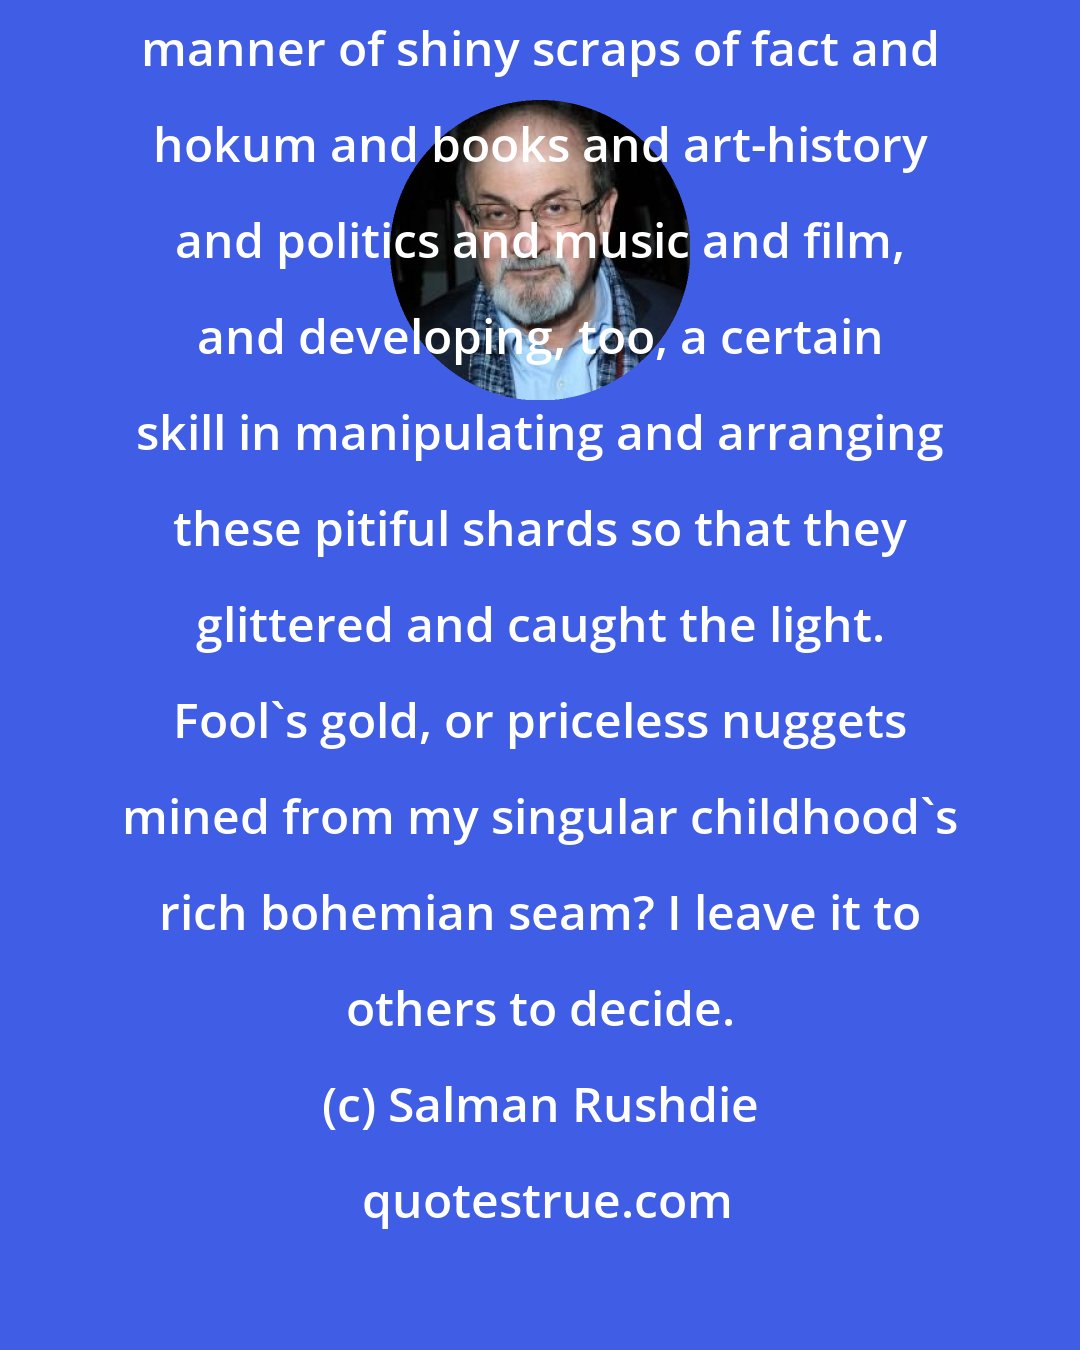 Salman Rushdie: I had become a kind of information magpie, gathering to myself all manner of shiny scraps of fact and hokum and books and art-history and politics and music and film, and developing, too, a certain skill in manipulating and arranging these pitiful shards so that they glittered and caught the light. Fool's gold, or priceless nuggets mined from my singular childhood's rich bohemian seam? I leave it to others to decide.